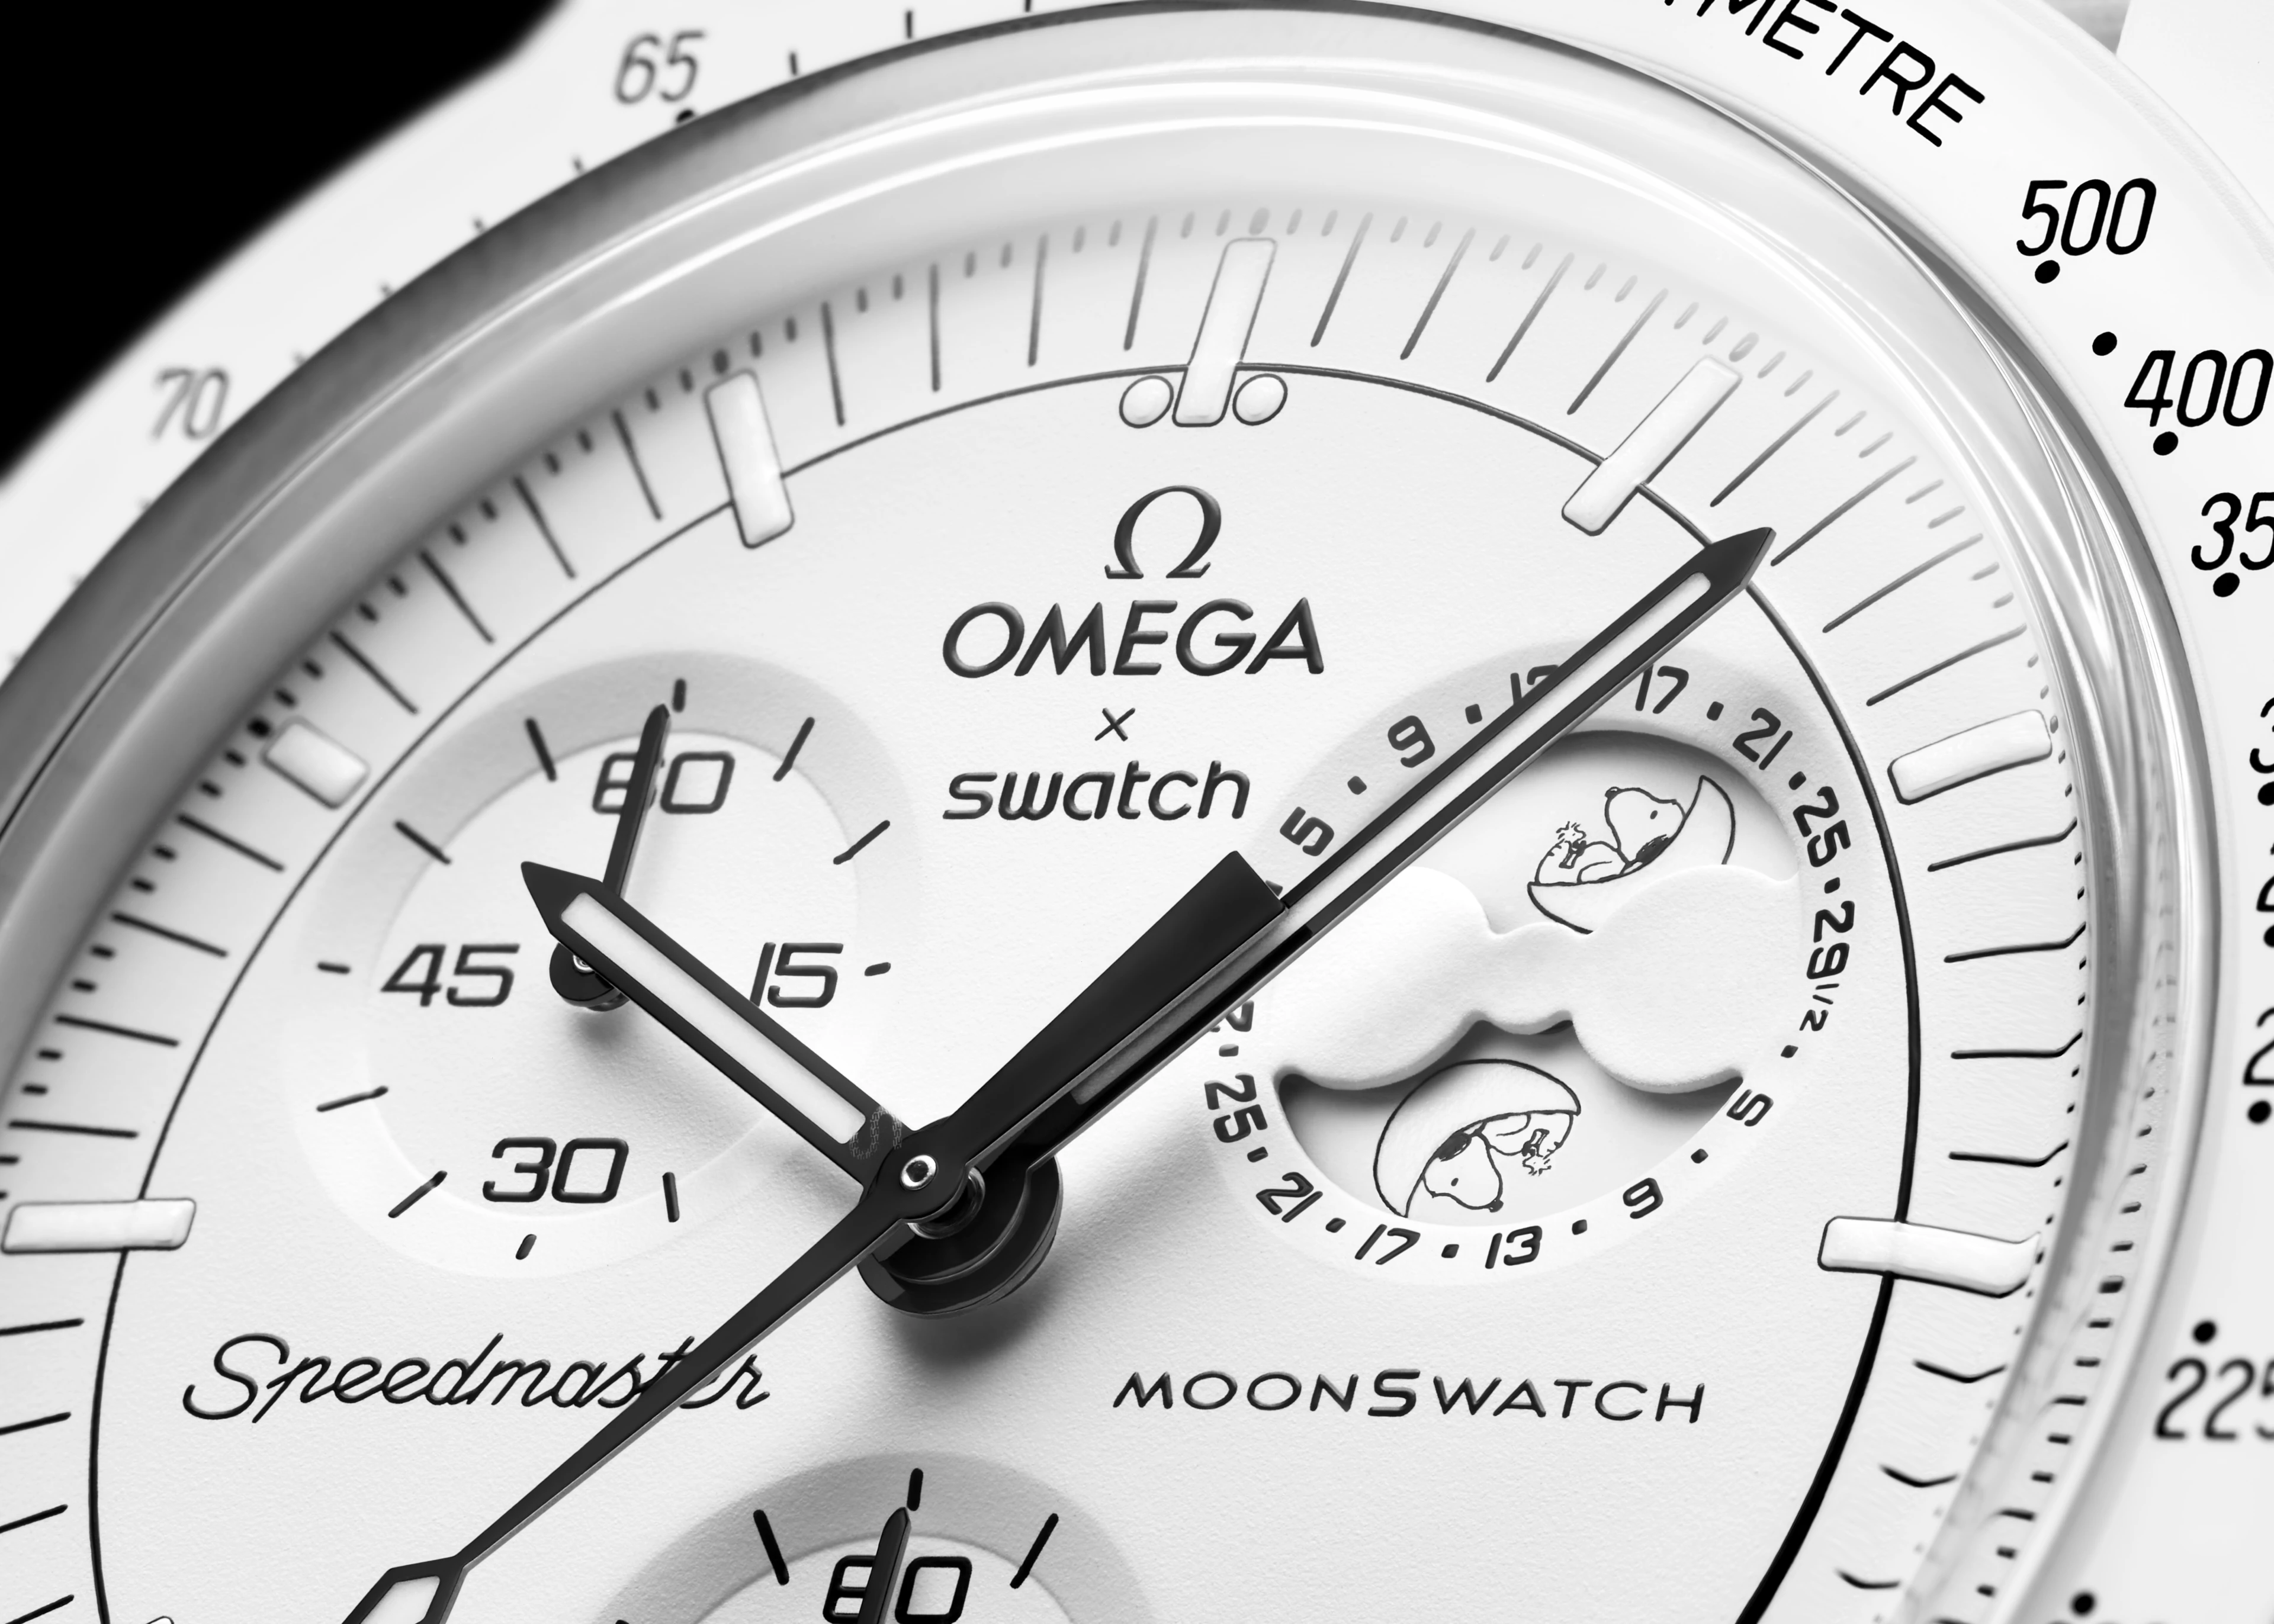 A new lunar landing for the Bioceramic MoonSwatch - with a moon phase watch